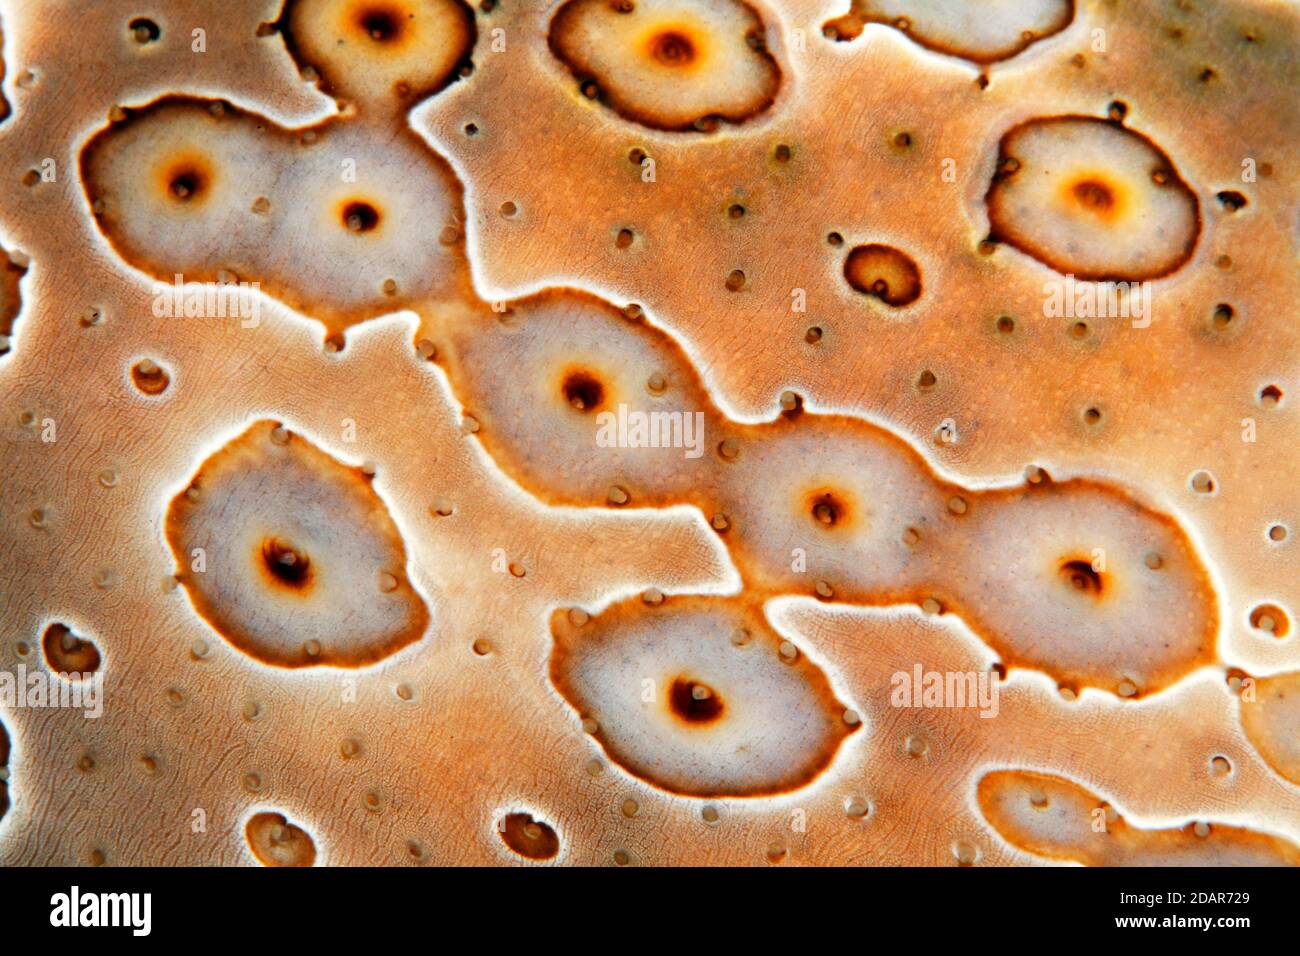 Detail of Eye patch sea cucumber (Bohadschia argus), Pacific, Great Barrier Reef, Australia Stock Photo